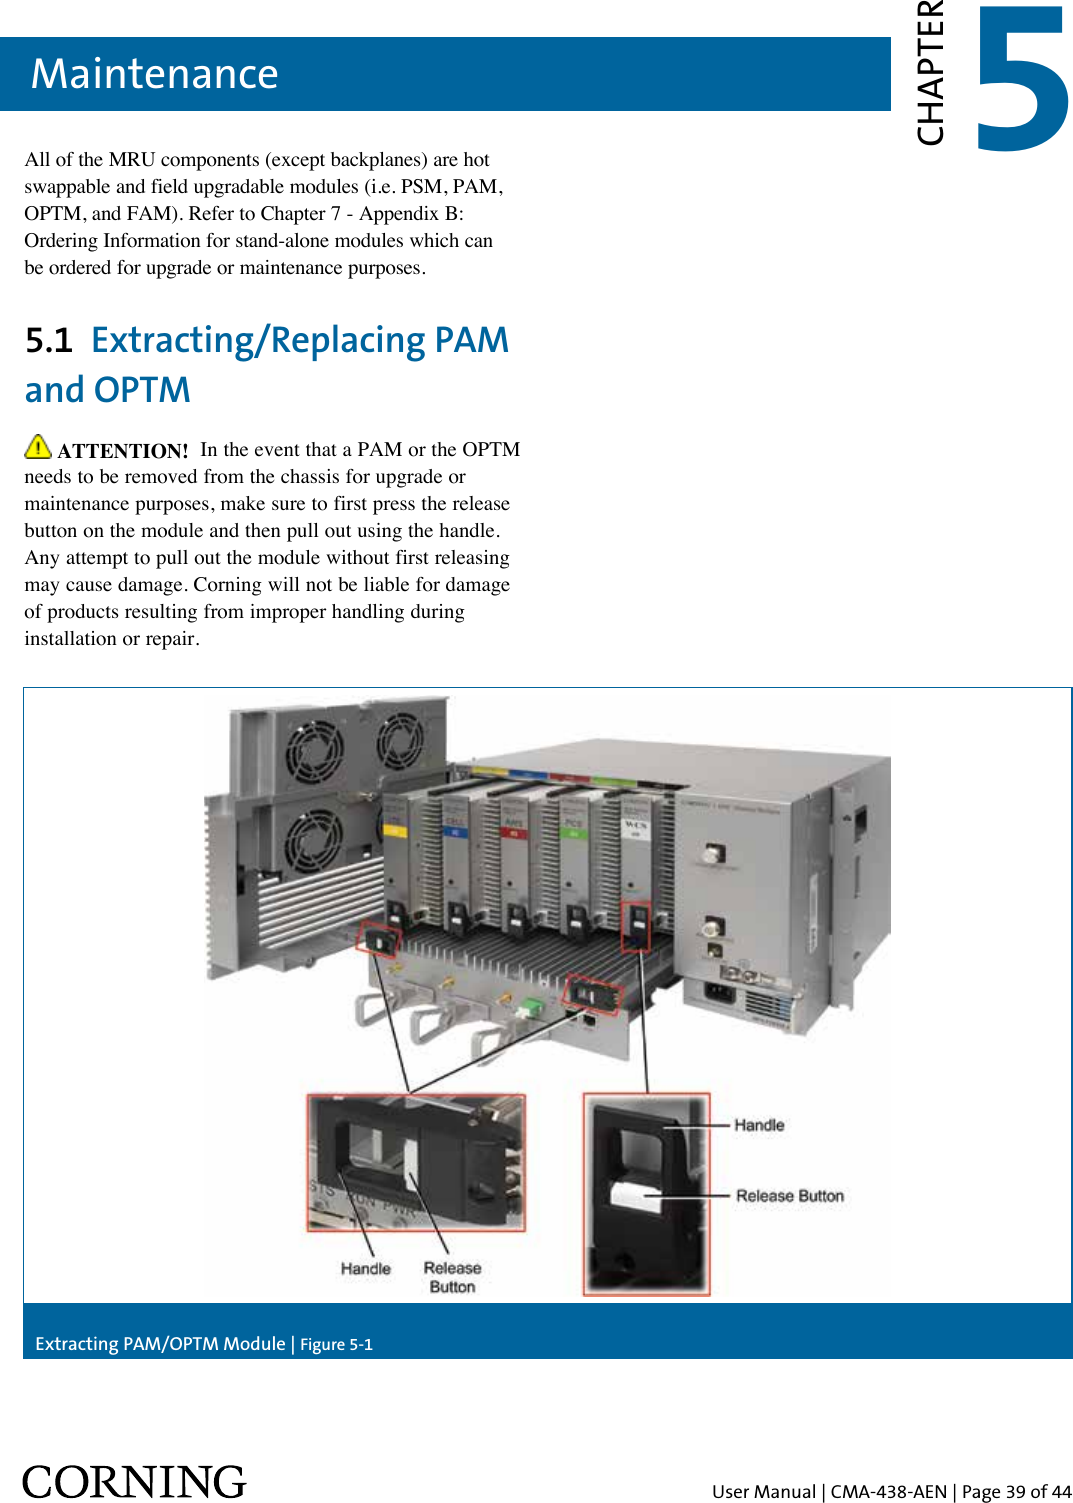 User Manual | CMA-438-AEN | Page 39 of 44Maintenance 5CHAPTERAll of the MRU components (except backplanes) are hot swappable and field upgradable modules (i.e. PSM, PAM, OPTM, and FAM). Refer to Chapter 7 - Appendix B: Ordering Information for stand-alone modules which can  be ordered for upgrade or maintenance purposes.5.1  Extracting/Replacing PAM and OPTM  ATTENTION!  In the event that a PAM or the OPTM needs to be removed from the chassis for upgrade or maintenance purposes, make sure to first press the release button on the module and then pull out using the handle. Any attempt to pull out the module without first releasing may cause damage. Corning will not be liable for damage of products resulting from improper handling during installation or repair.Extracting PAM/OPTM Module | Figure 5-1